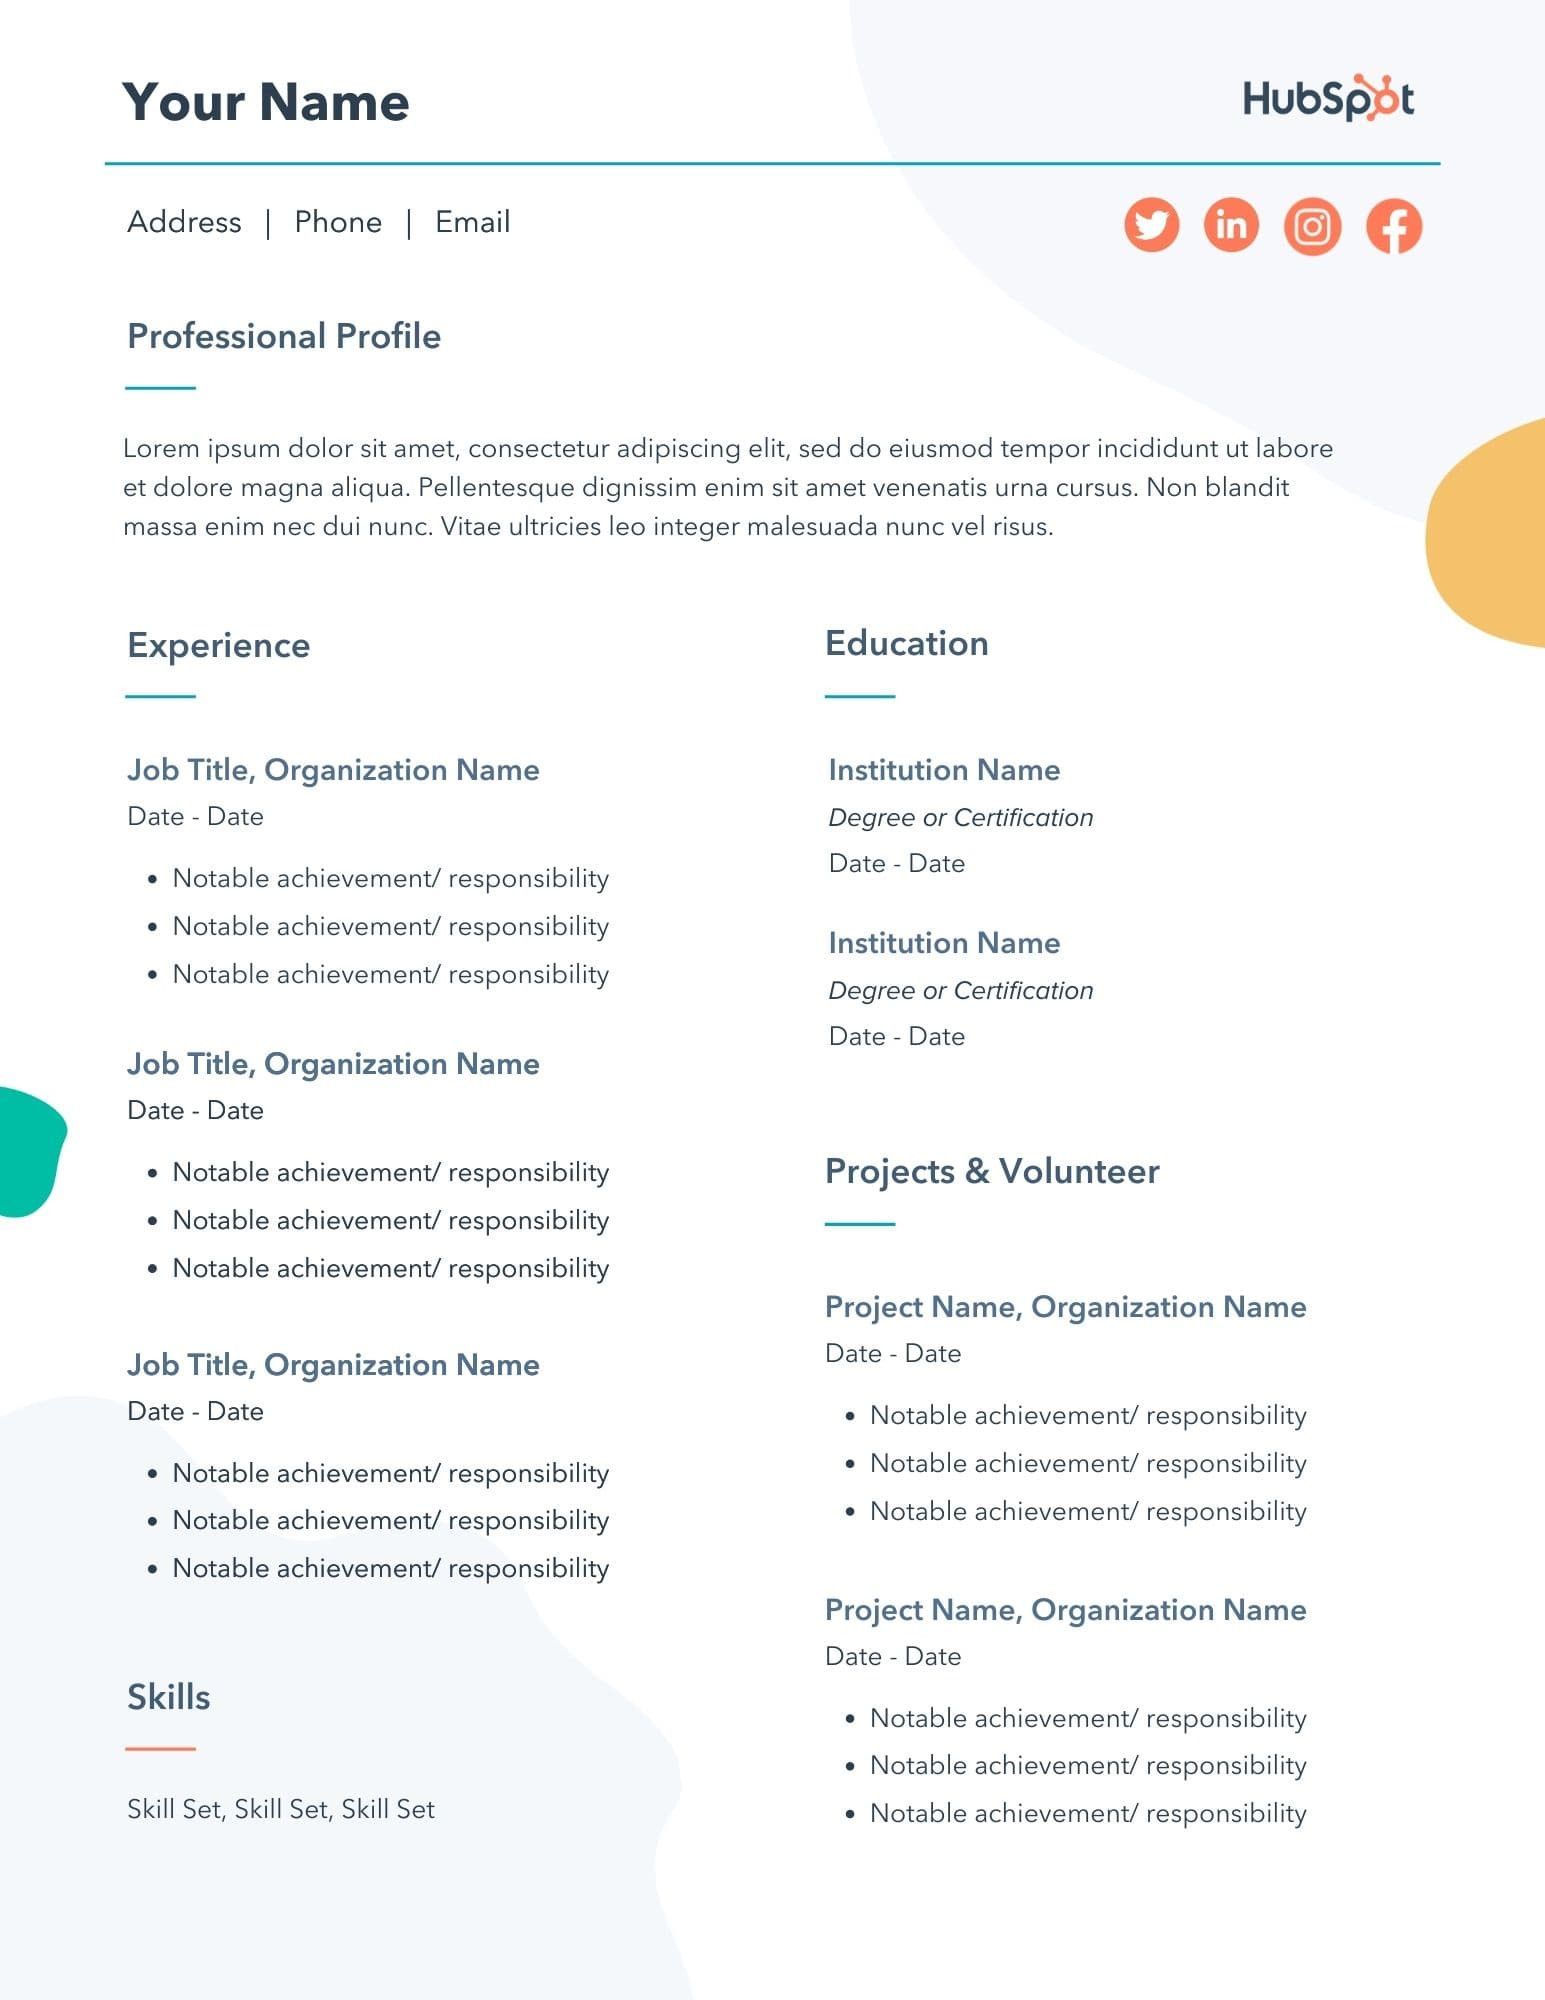 Free Resume Templates for Experienced Professionals 29 Free Resume Templates for Microsoft Word (& How to Make Your Own)